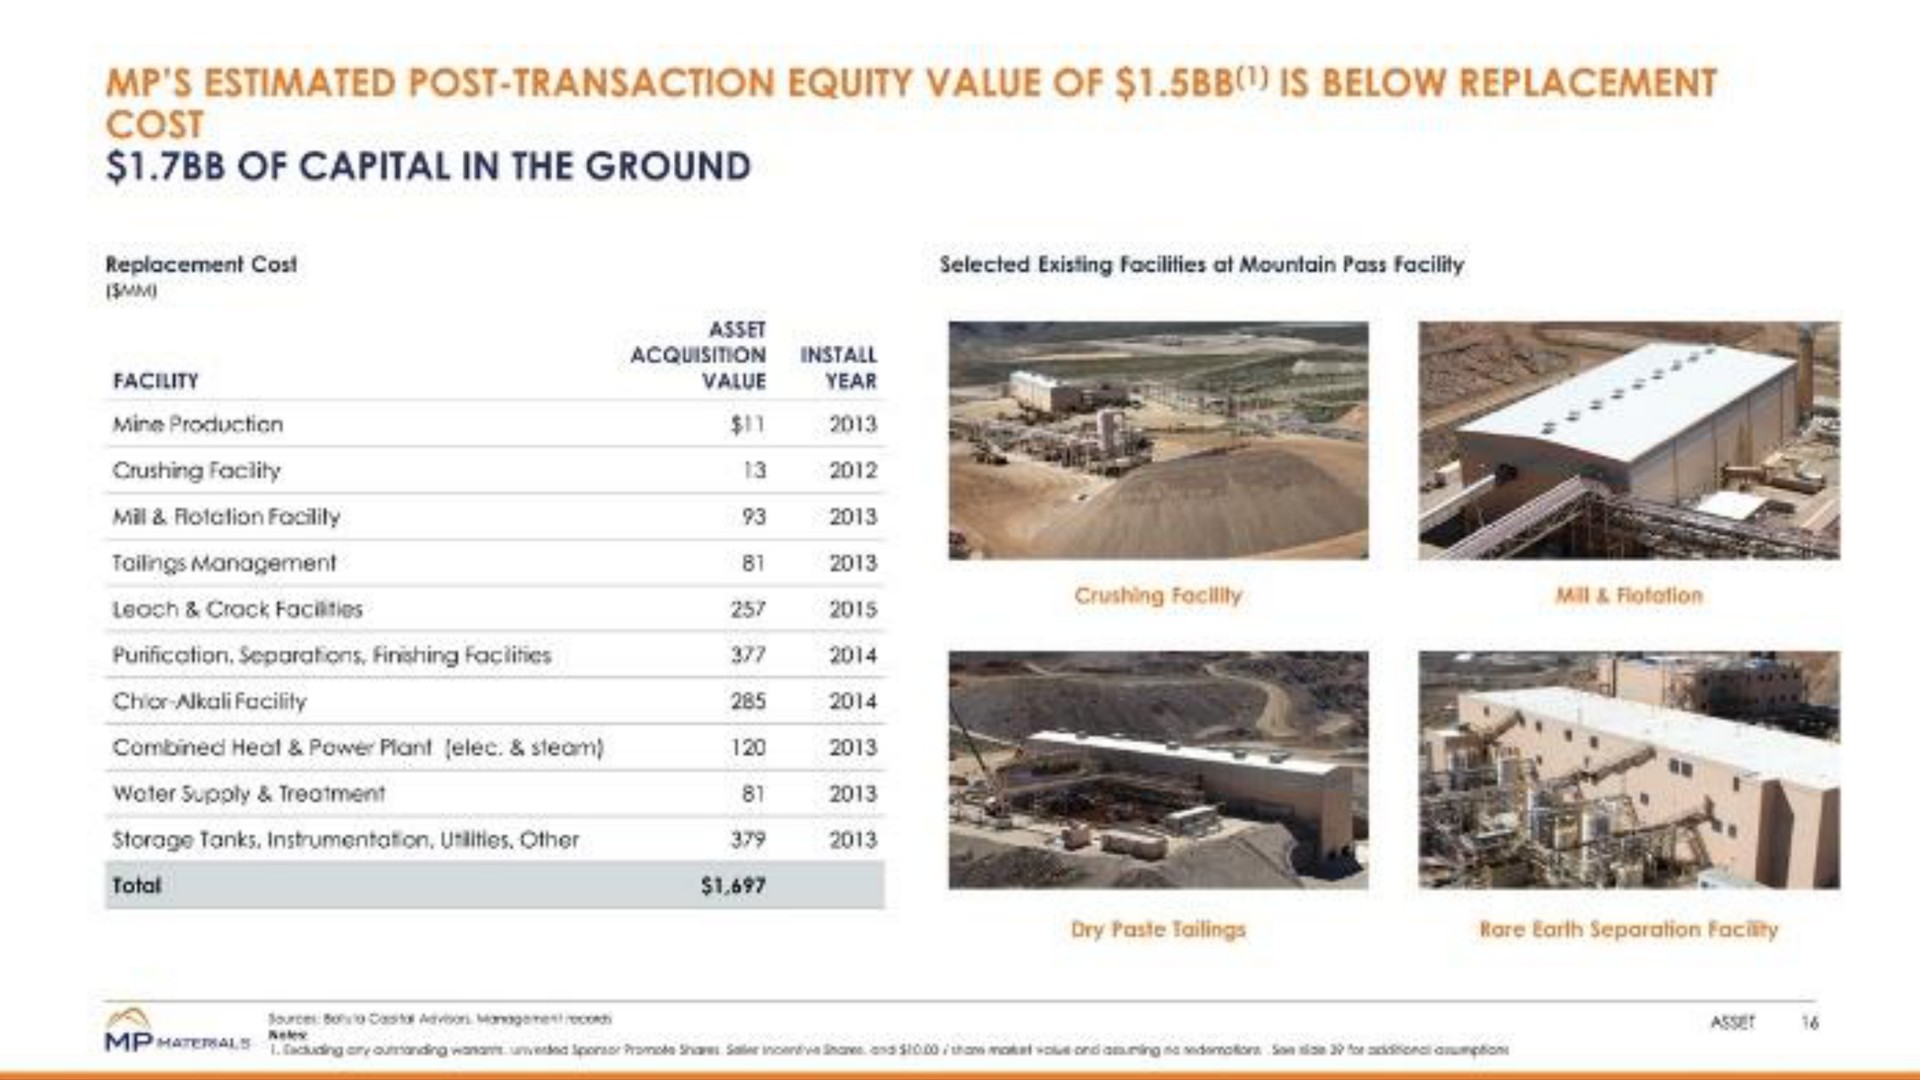 cost of capital in the ground | MP Materials